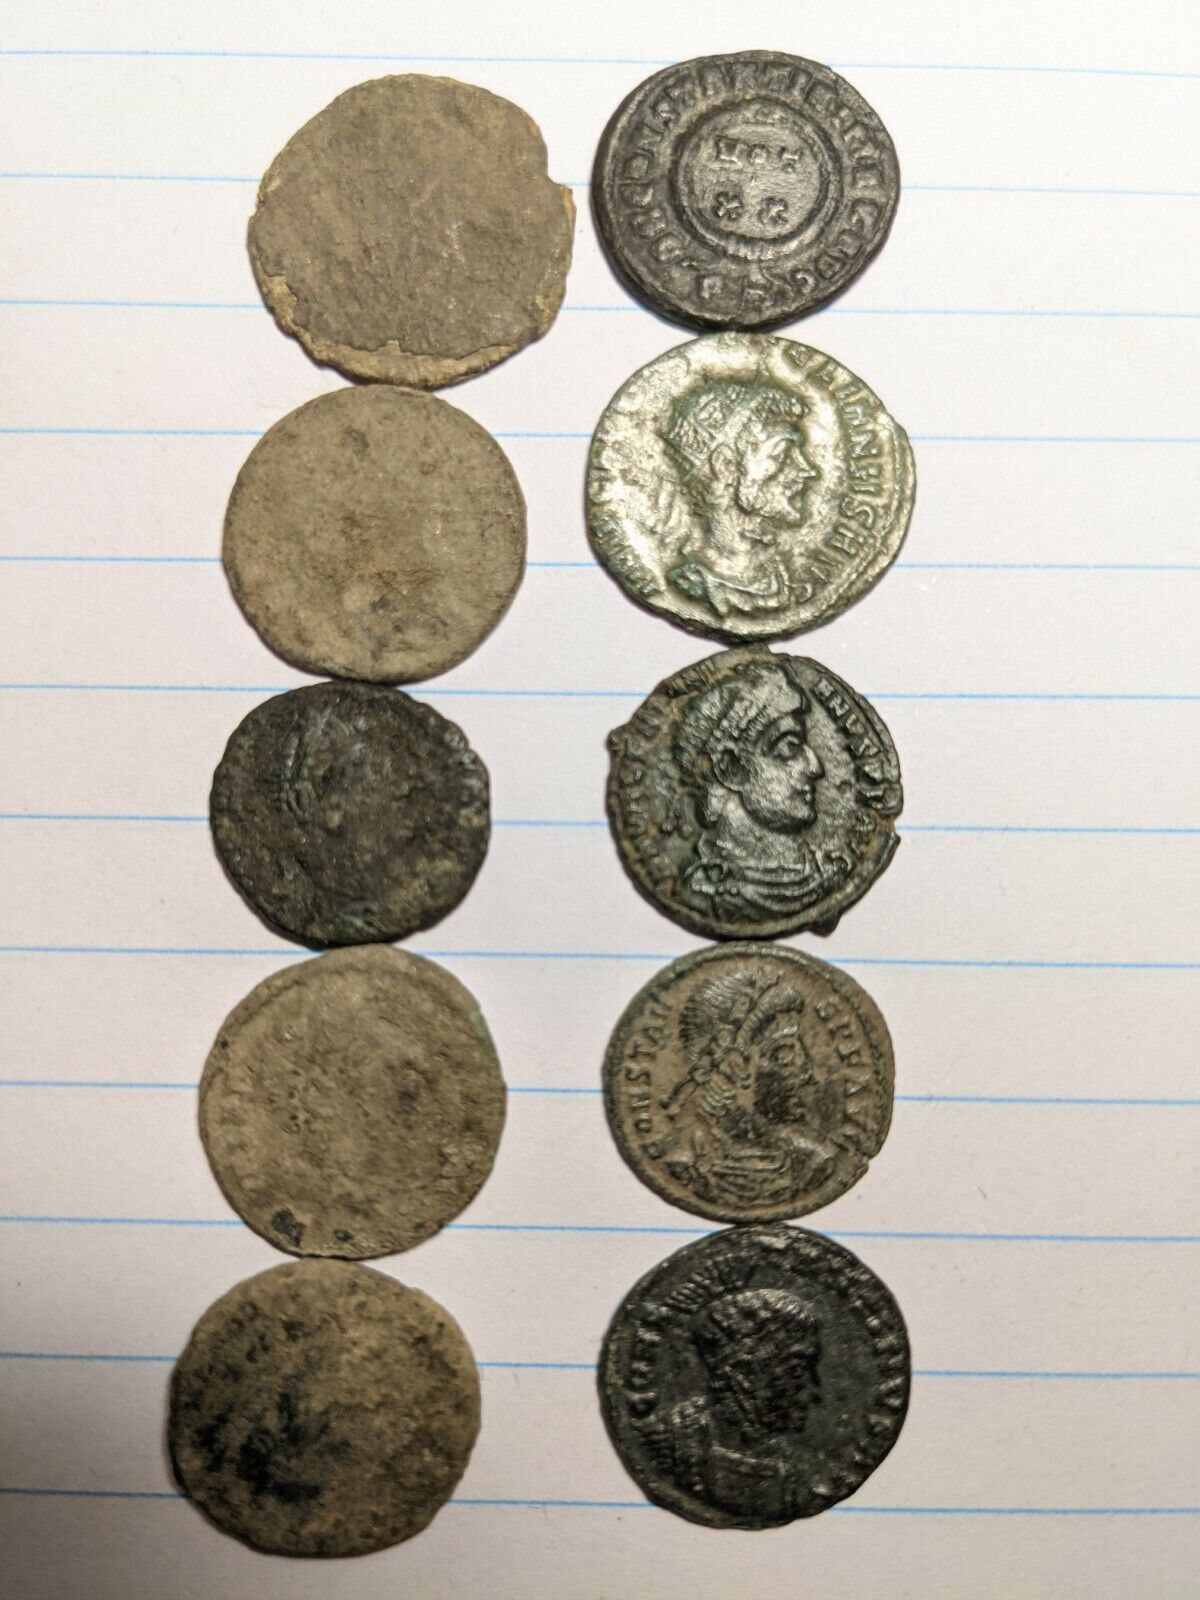 GENUINE UNCLEANED ANCIENT ROMAN COINS. GOOD QUALITY. Silver coins Included! - Premium Ancient Coins - Lot